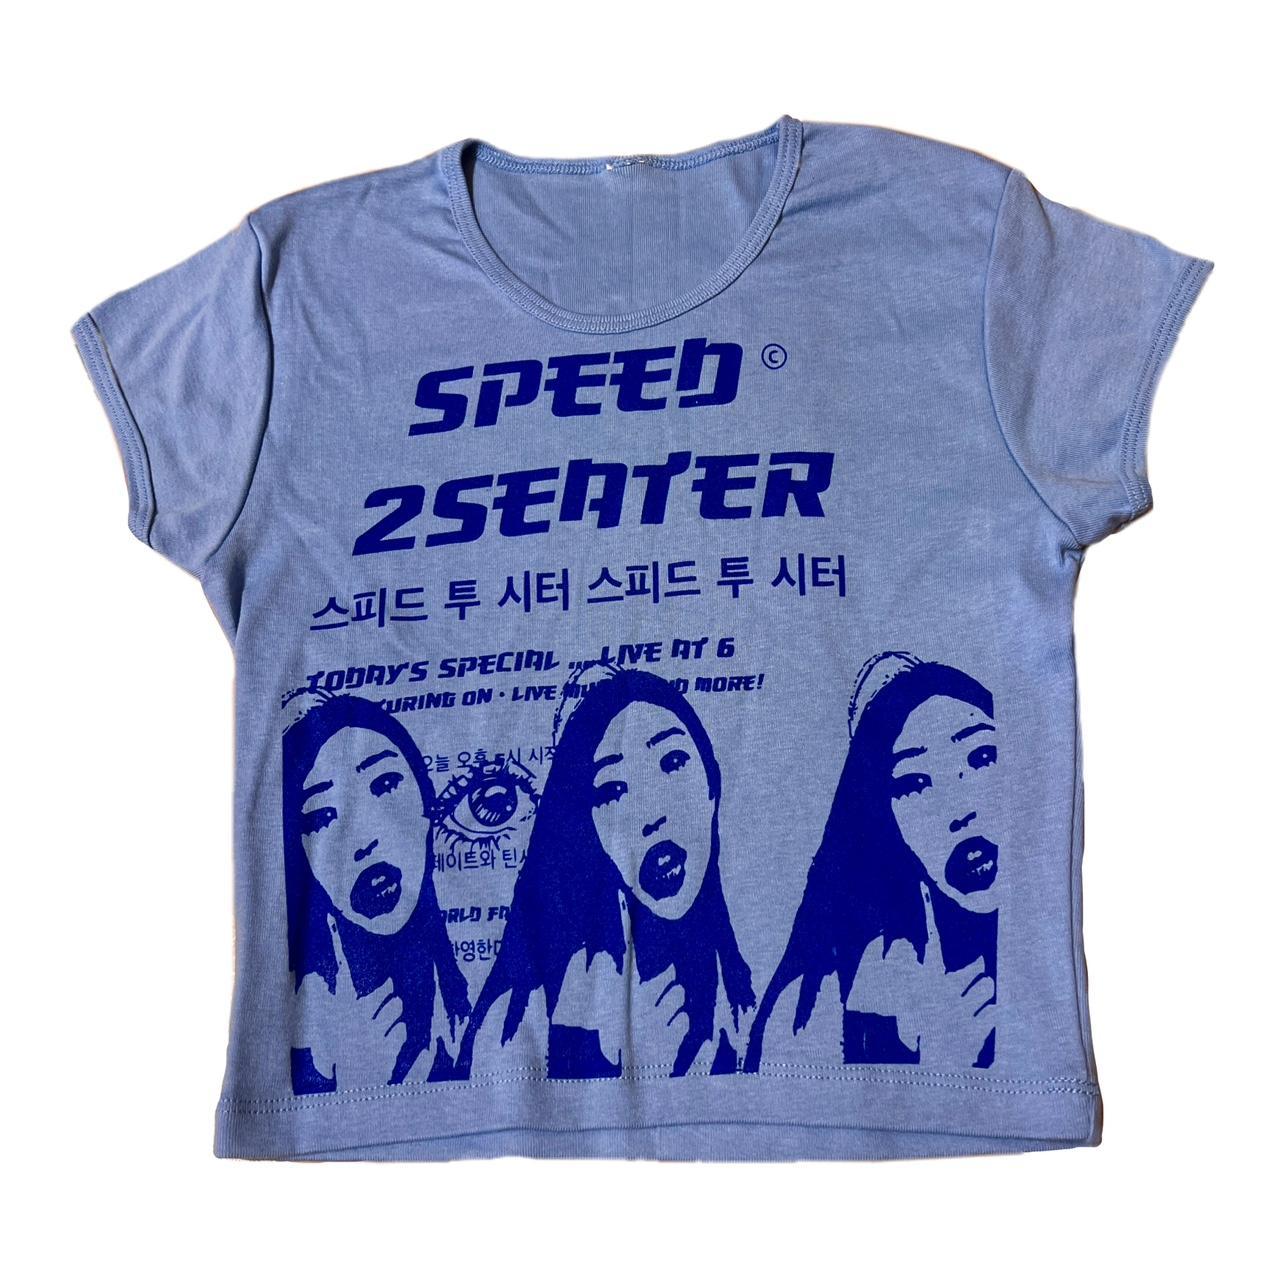 item listed by speed2seater